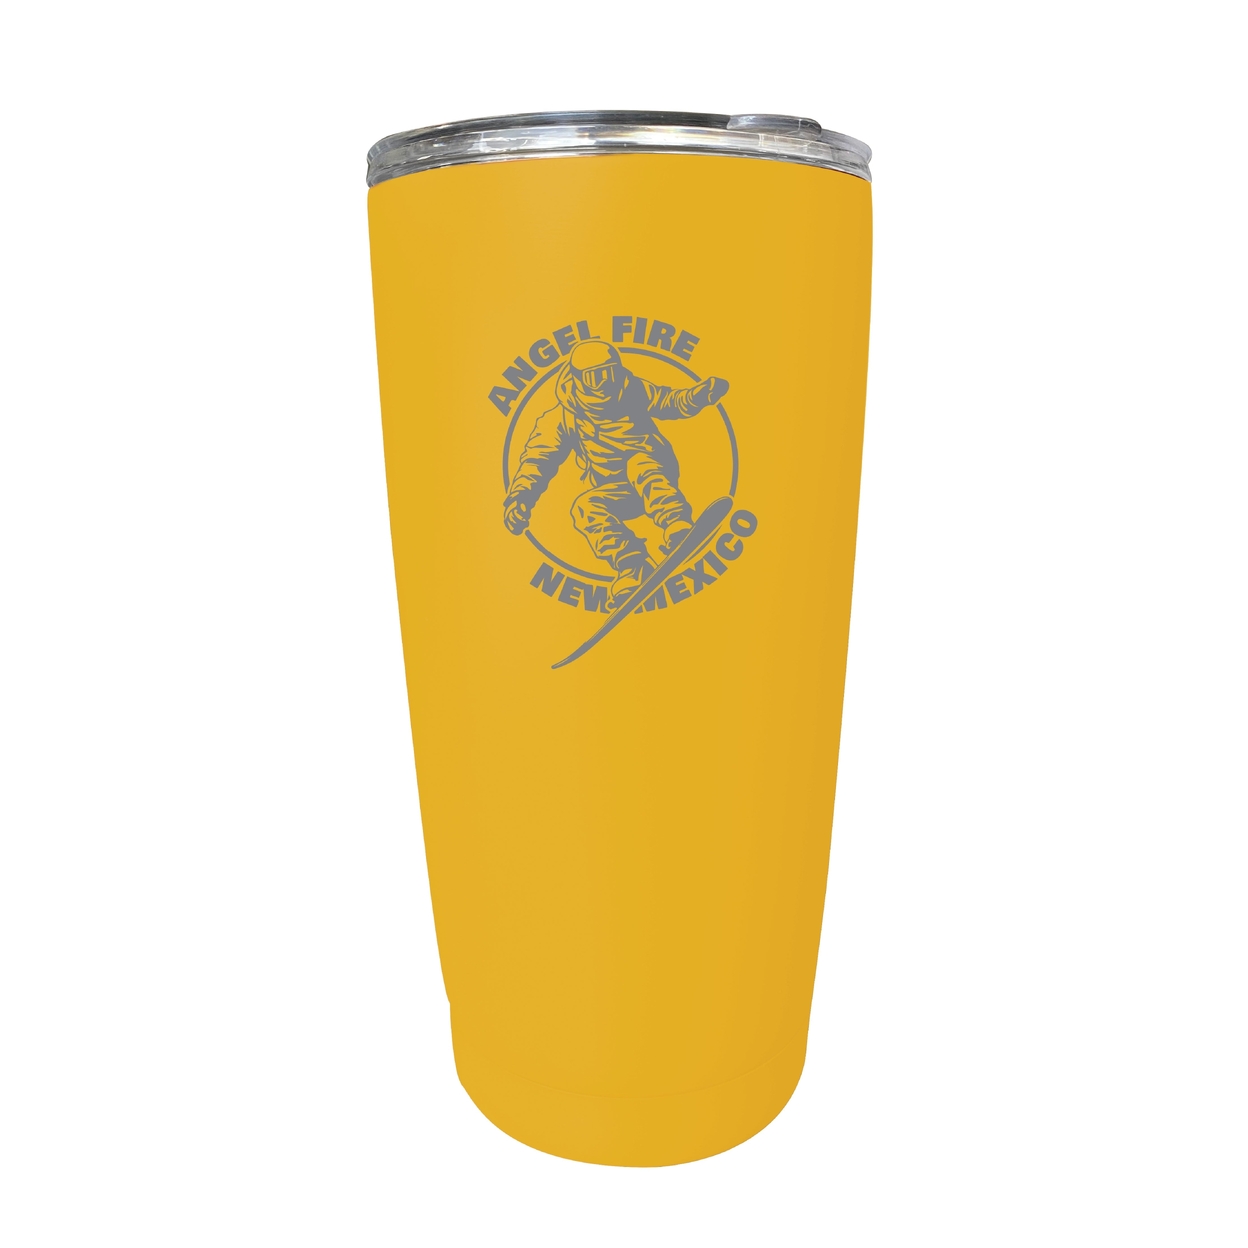 Angel Fire New Mexico Souvenir 16 Oz Engraved Stainless Steel Insulated Tumbler - Yellow,,Single Unit